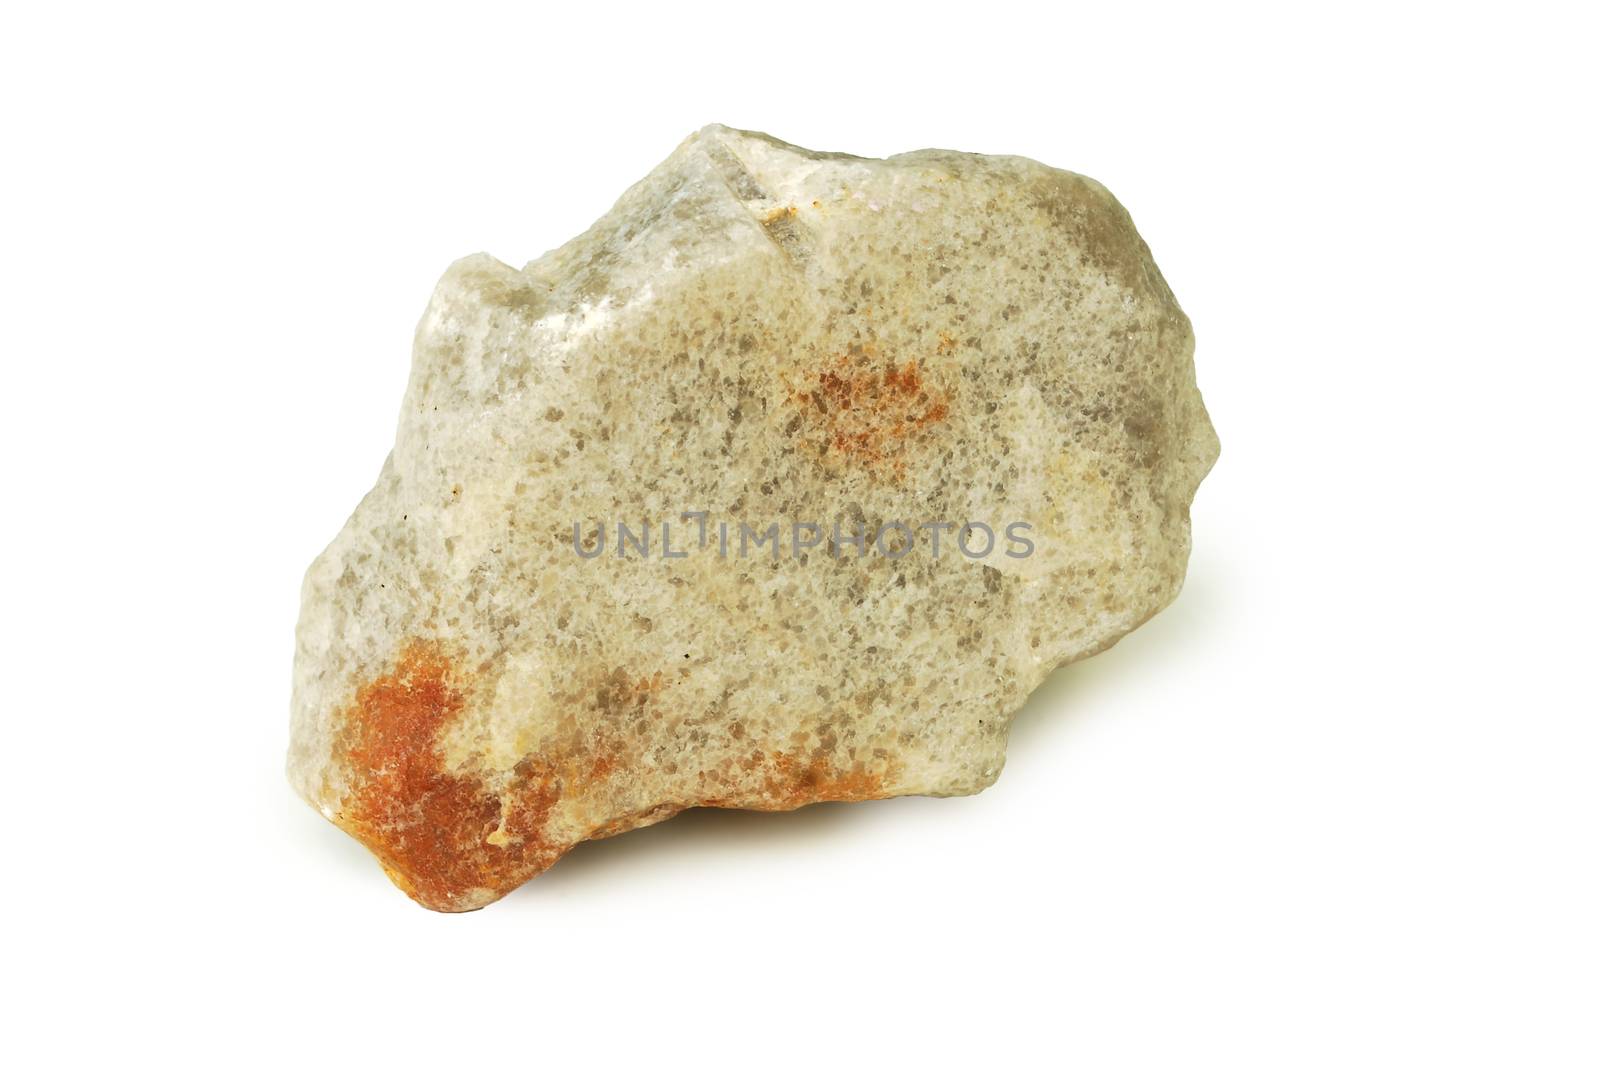 Garden decoration stone.Stone stream.With Clipping Path.